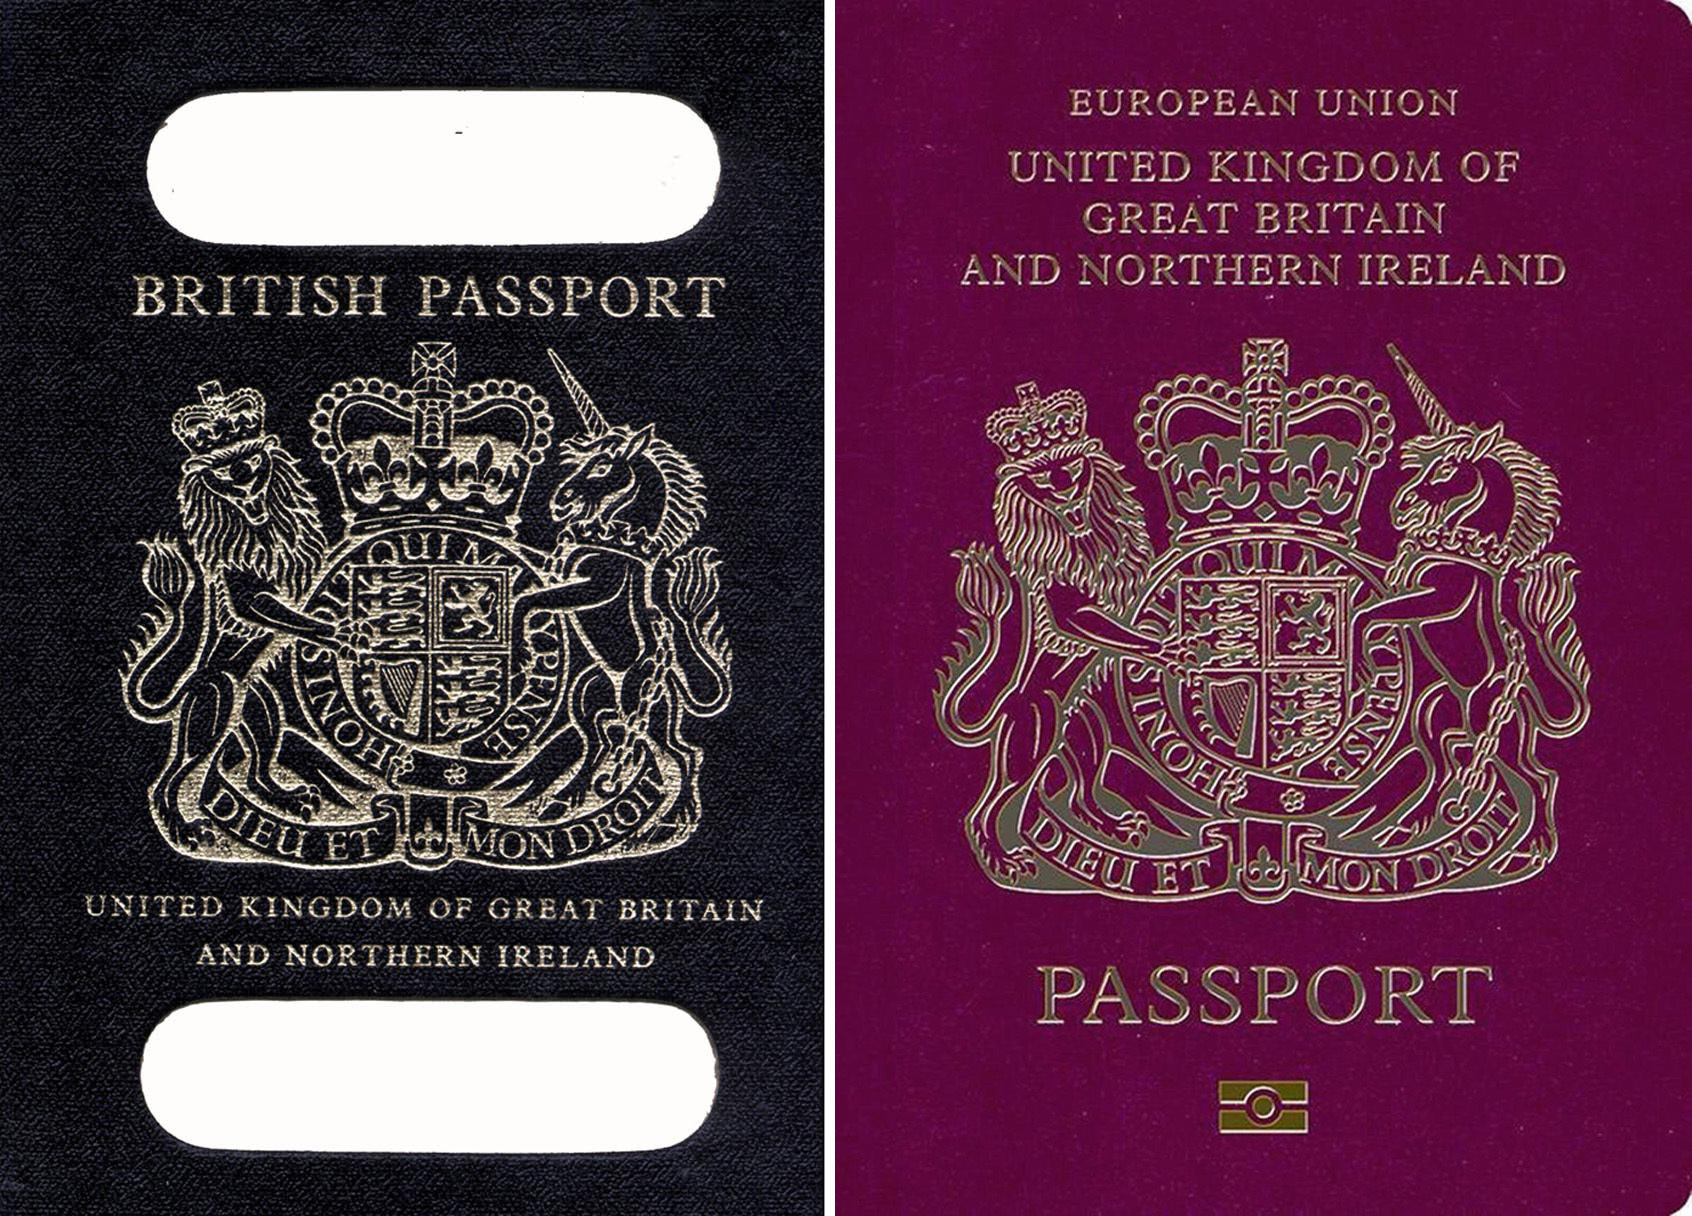 Composite picture of an old British passport (left) and a burgundy UK passport in the European Union style format.